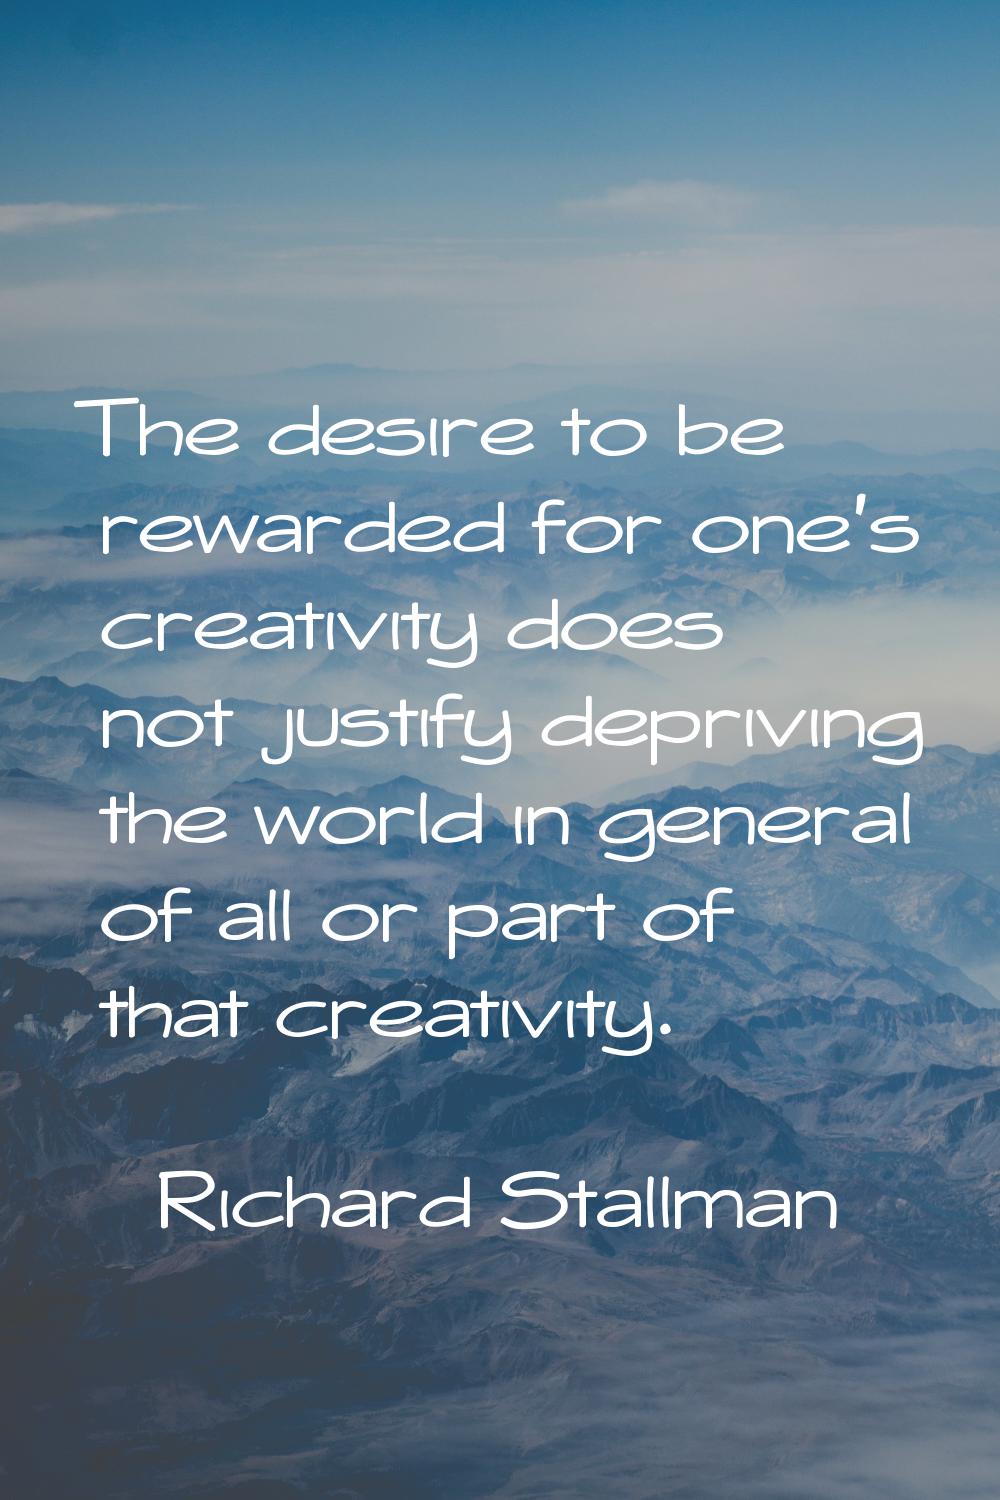 The desire to be rewarded for one's creativity does not justify depriving the world in general of a